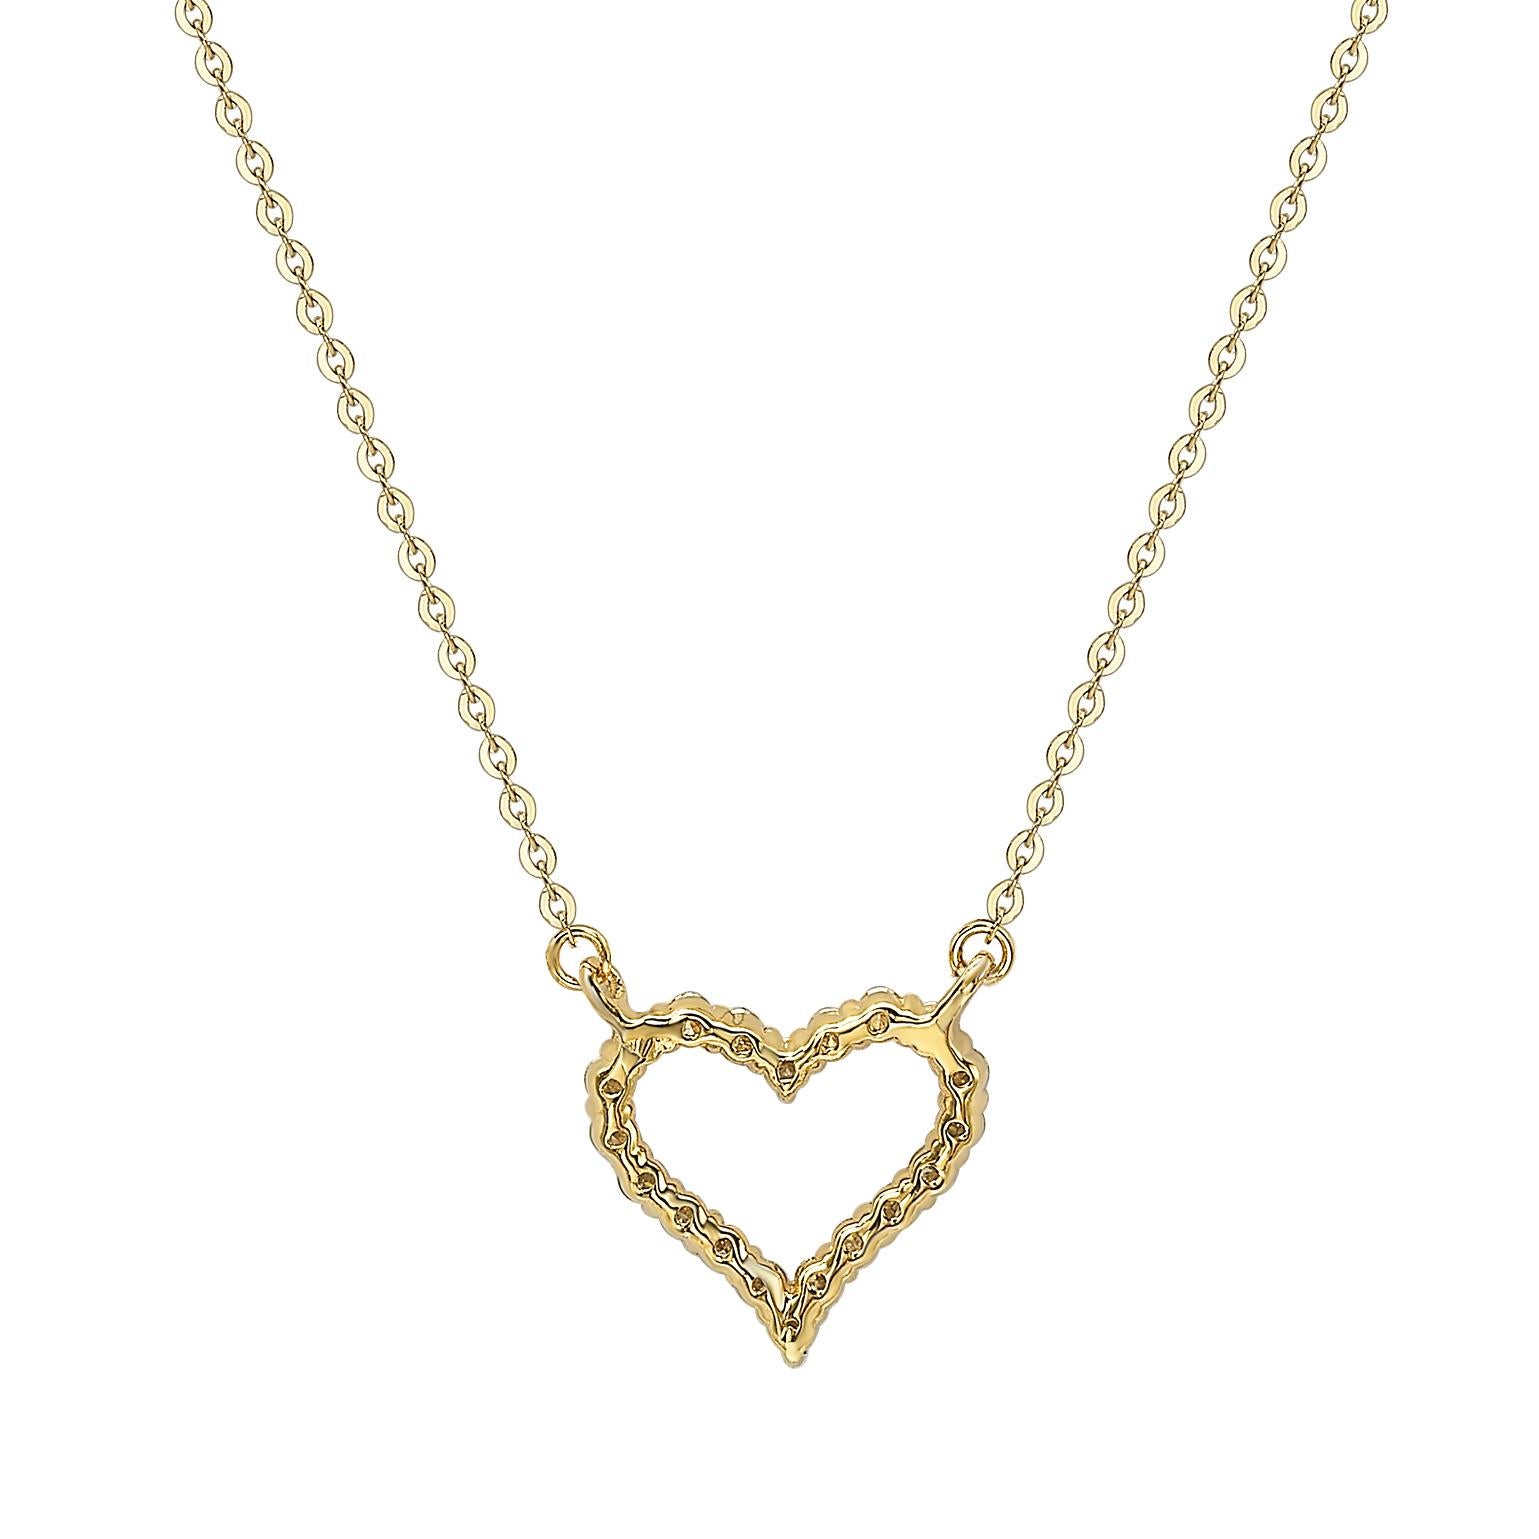 This breathtaking Suzy Levian heart necklace features natural diamonds, hand-set in 14-Karat yellow gold. It's the perfect gift to let someone special know you're thinking of them. Each heart necklace features a single row of pave natural white